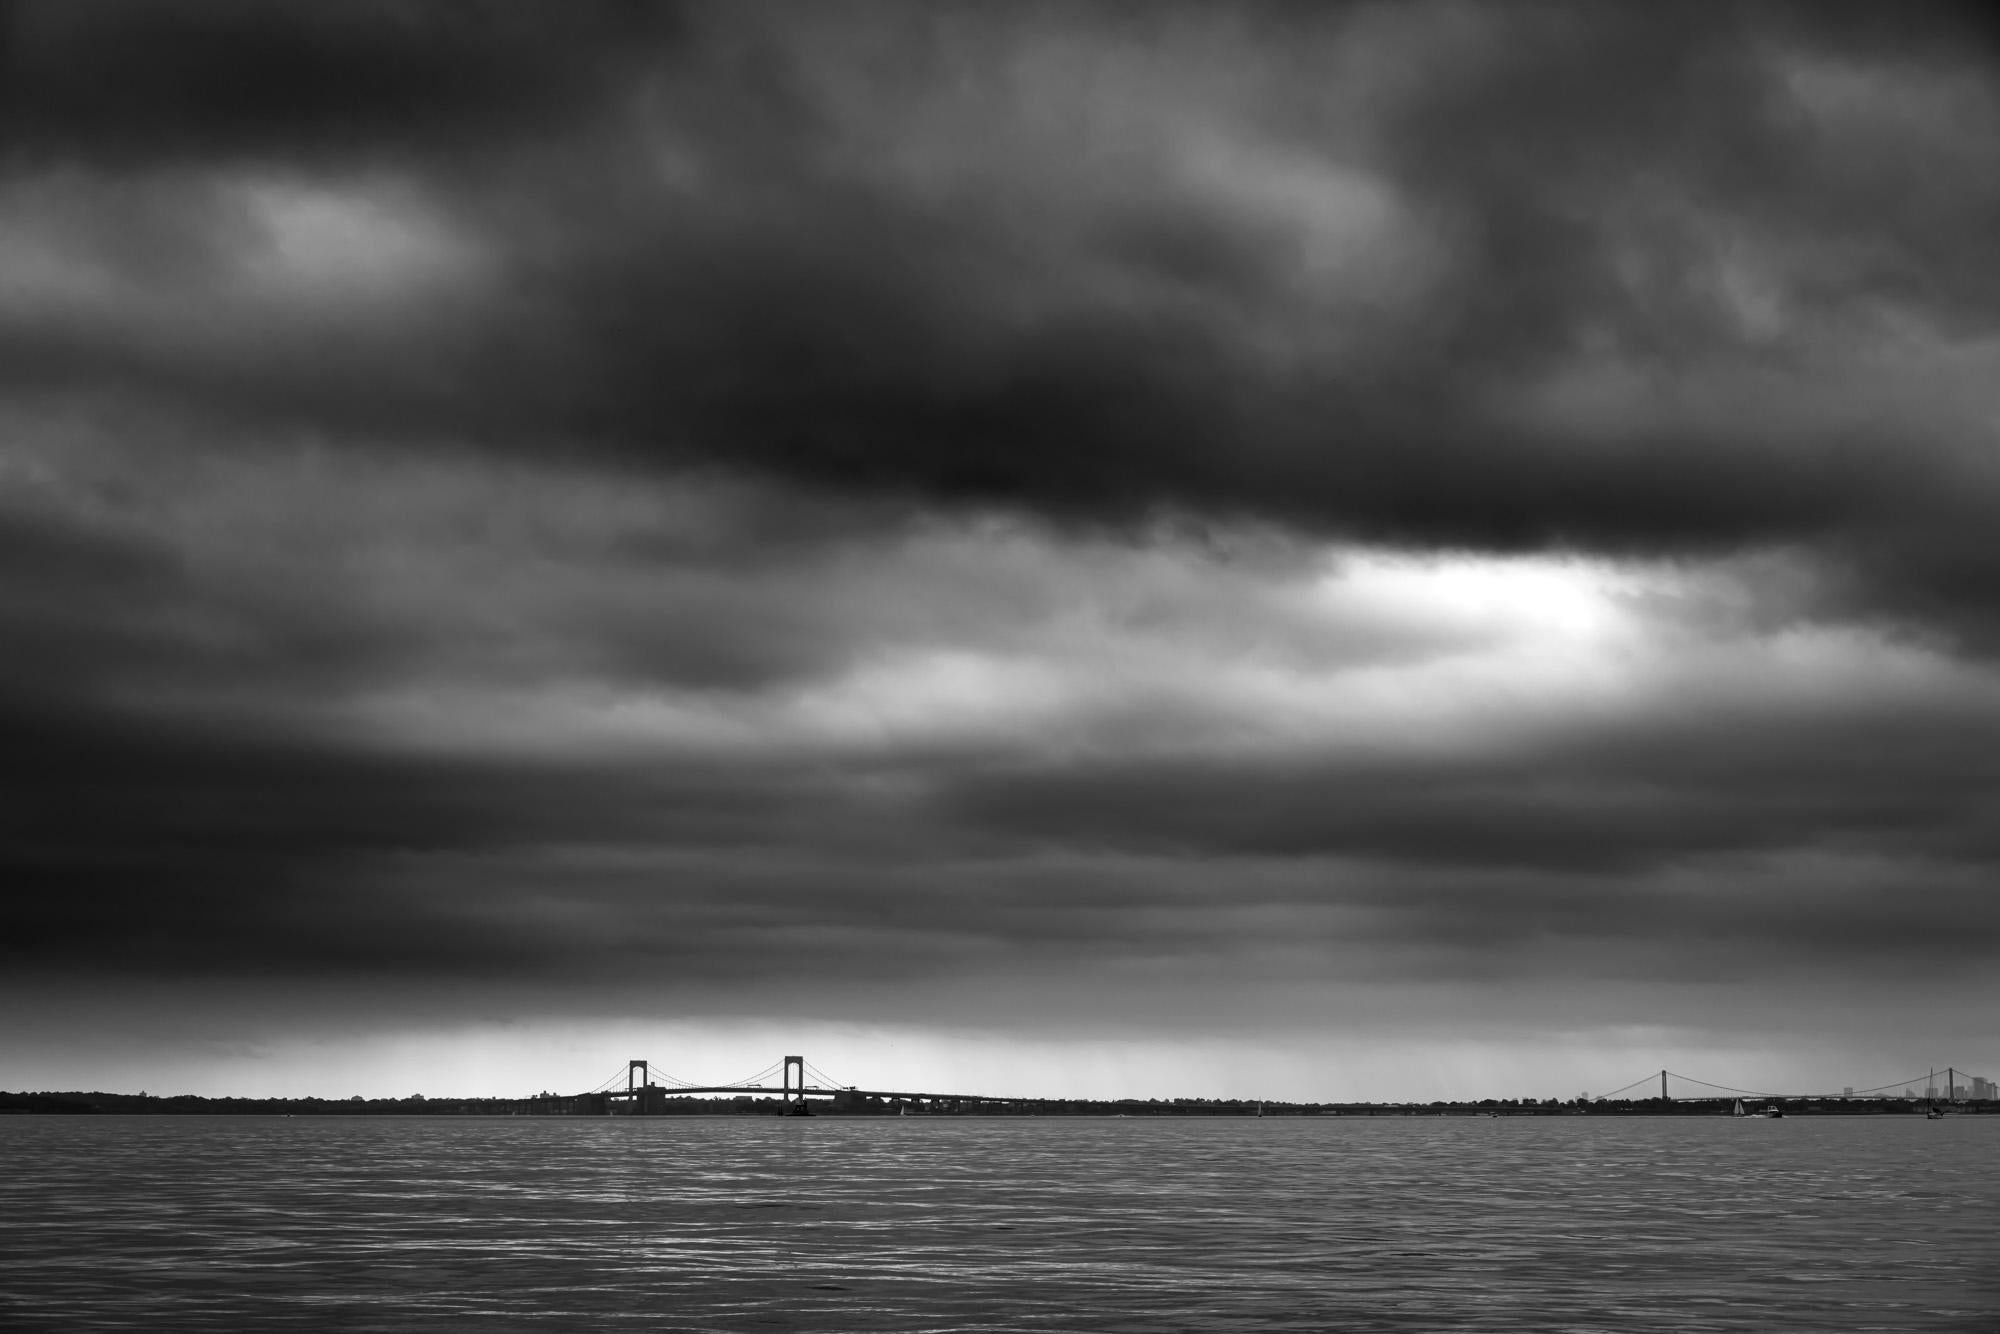 Limited Edition Black and White Photograph " Throgs Neck Bridge " 2020 I spent many hours on the water, kayaking, sailing, motoring, fishing and having fun.  It's a fine line between dangerous conditions and the right time to photograph. This image